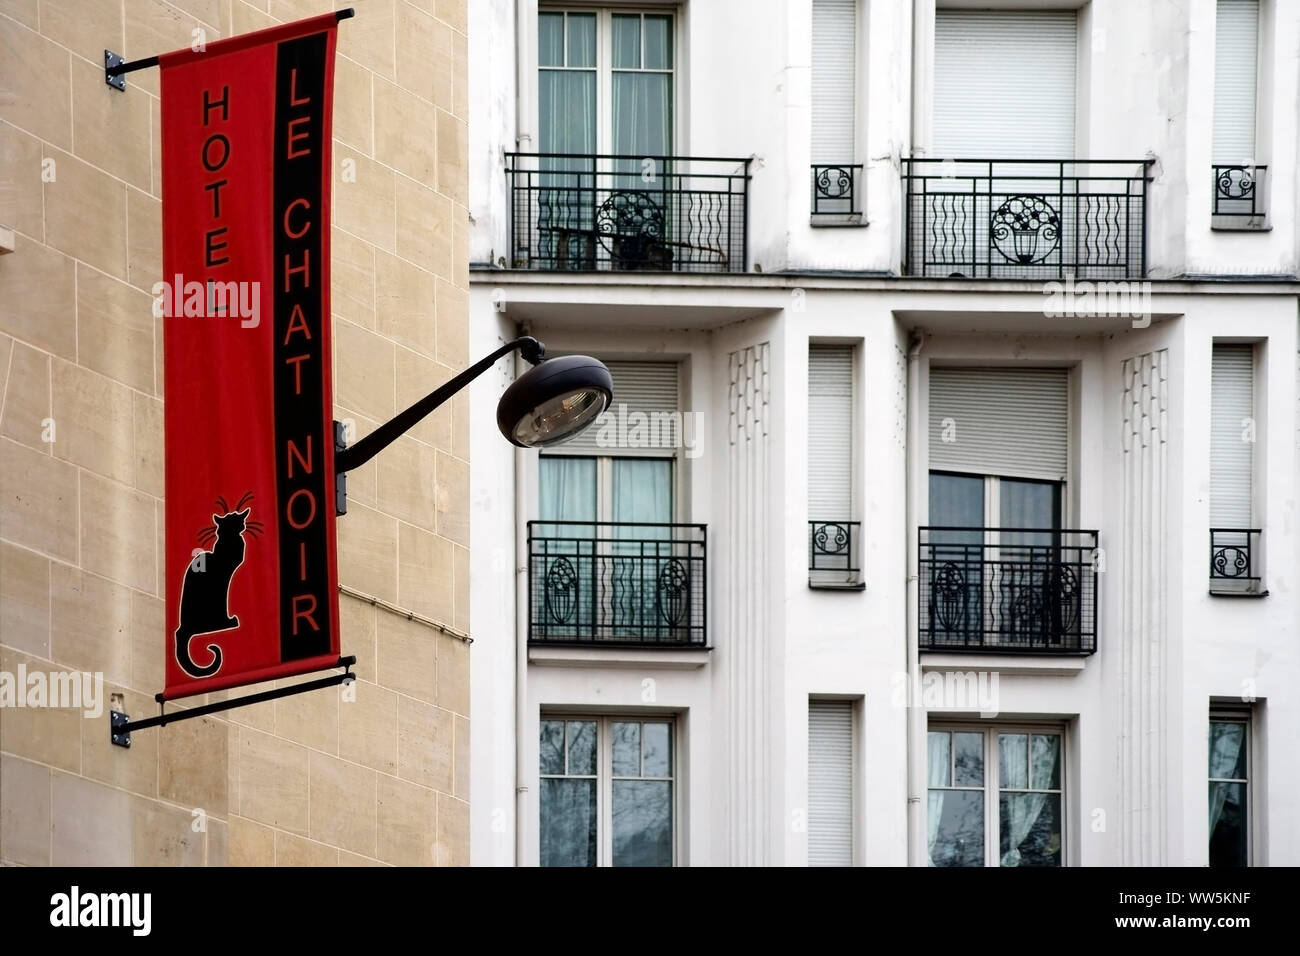 The entrance sign of the hotel Le chat Noir in the famous city district Montmartre in Paris, Stock Photo